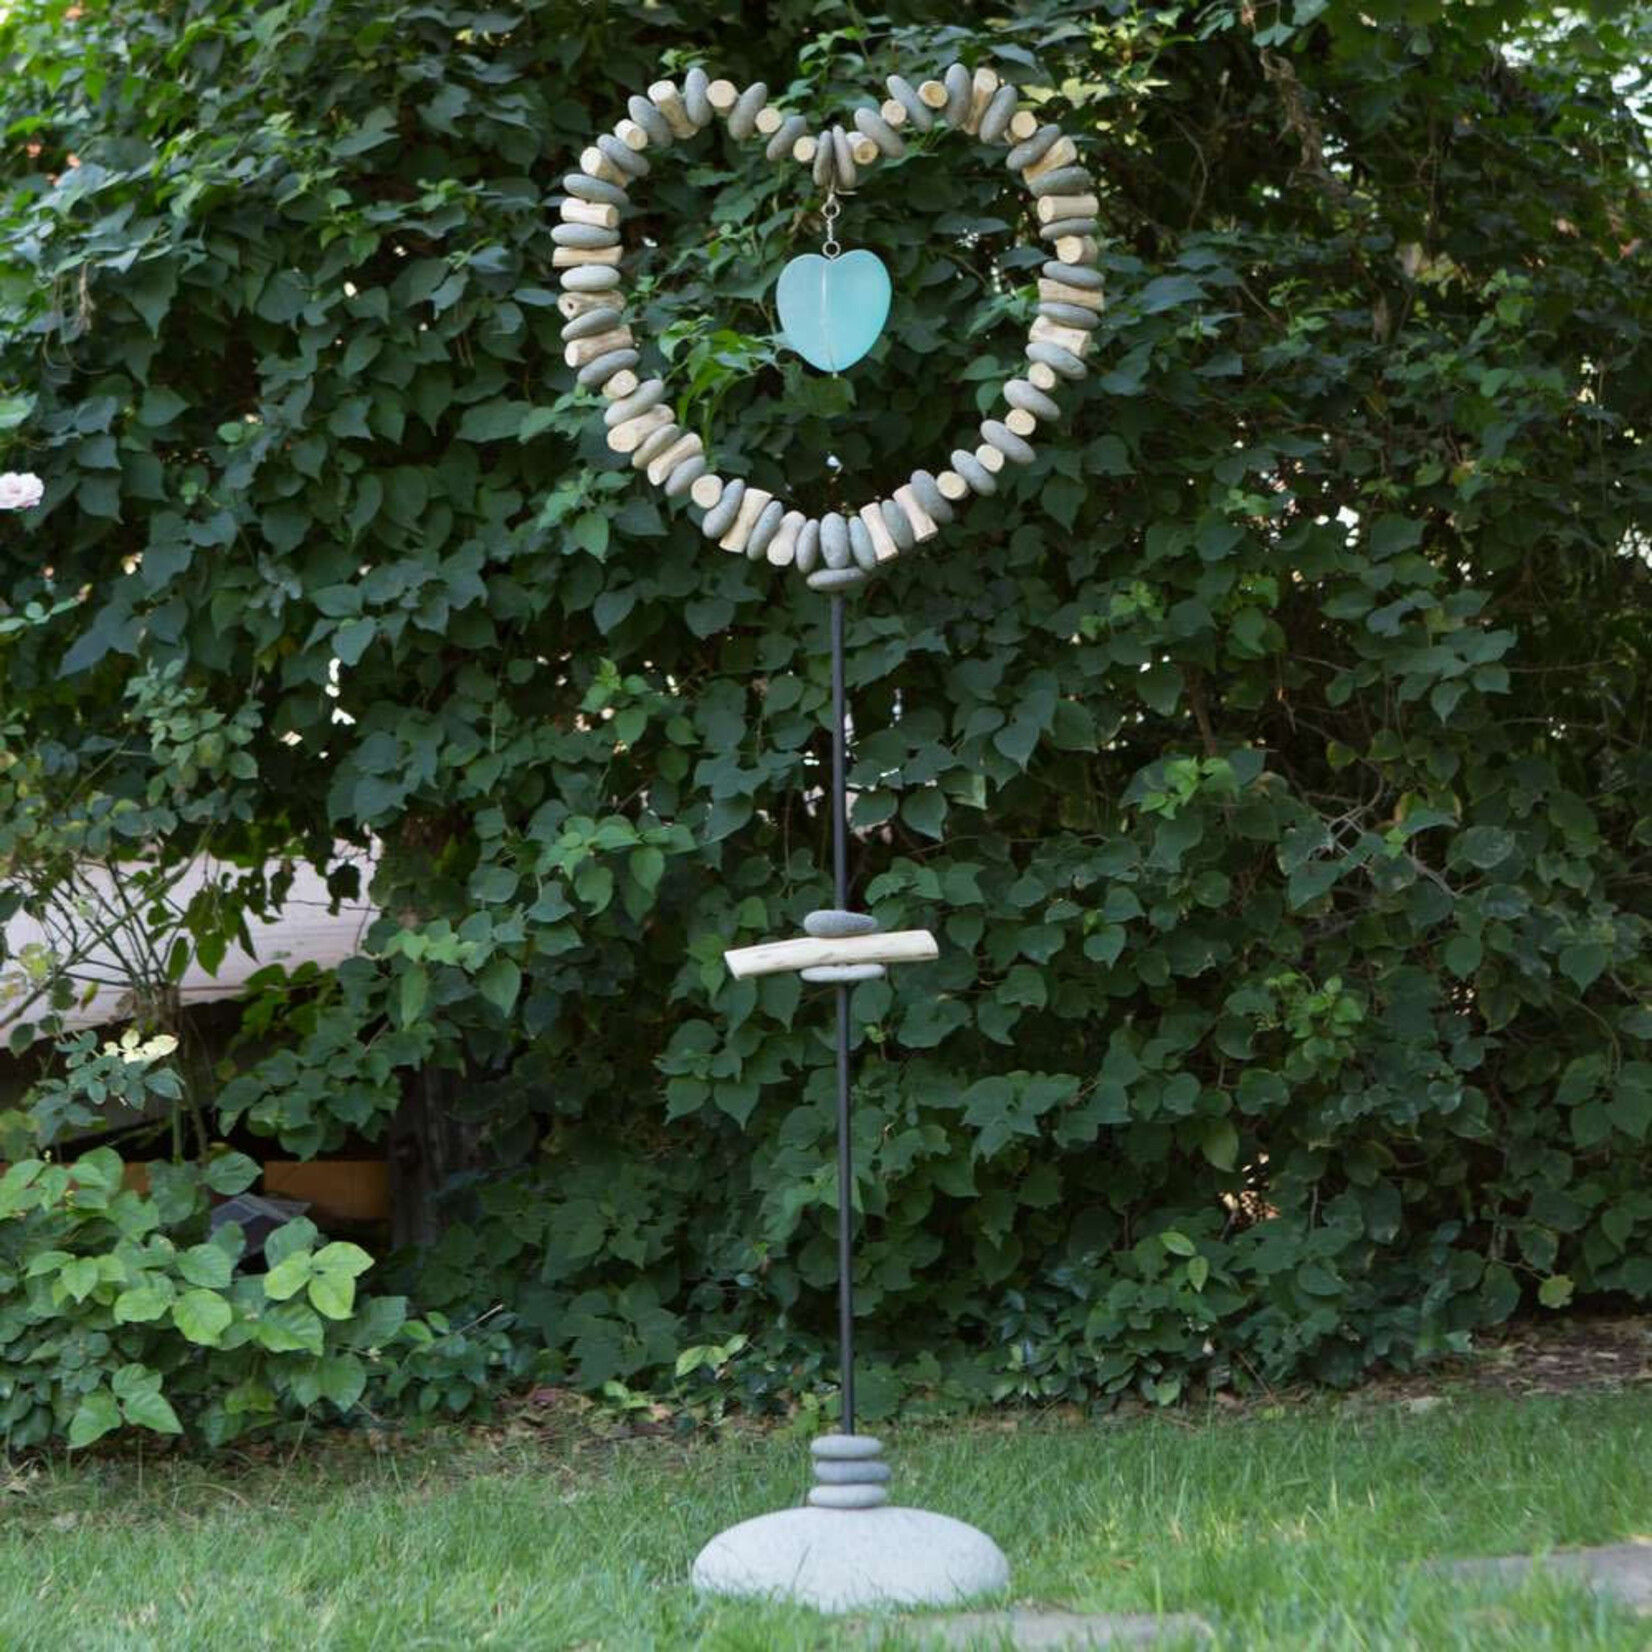 Garden Age Supply Heart Garden Stand with Glass Heart Large